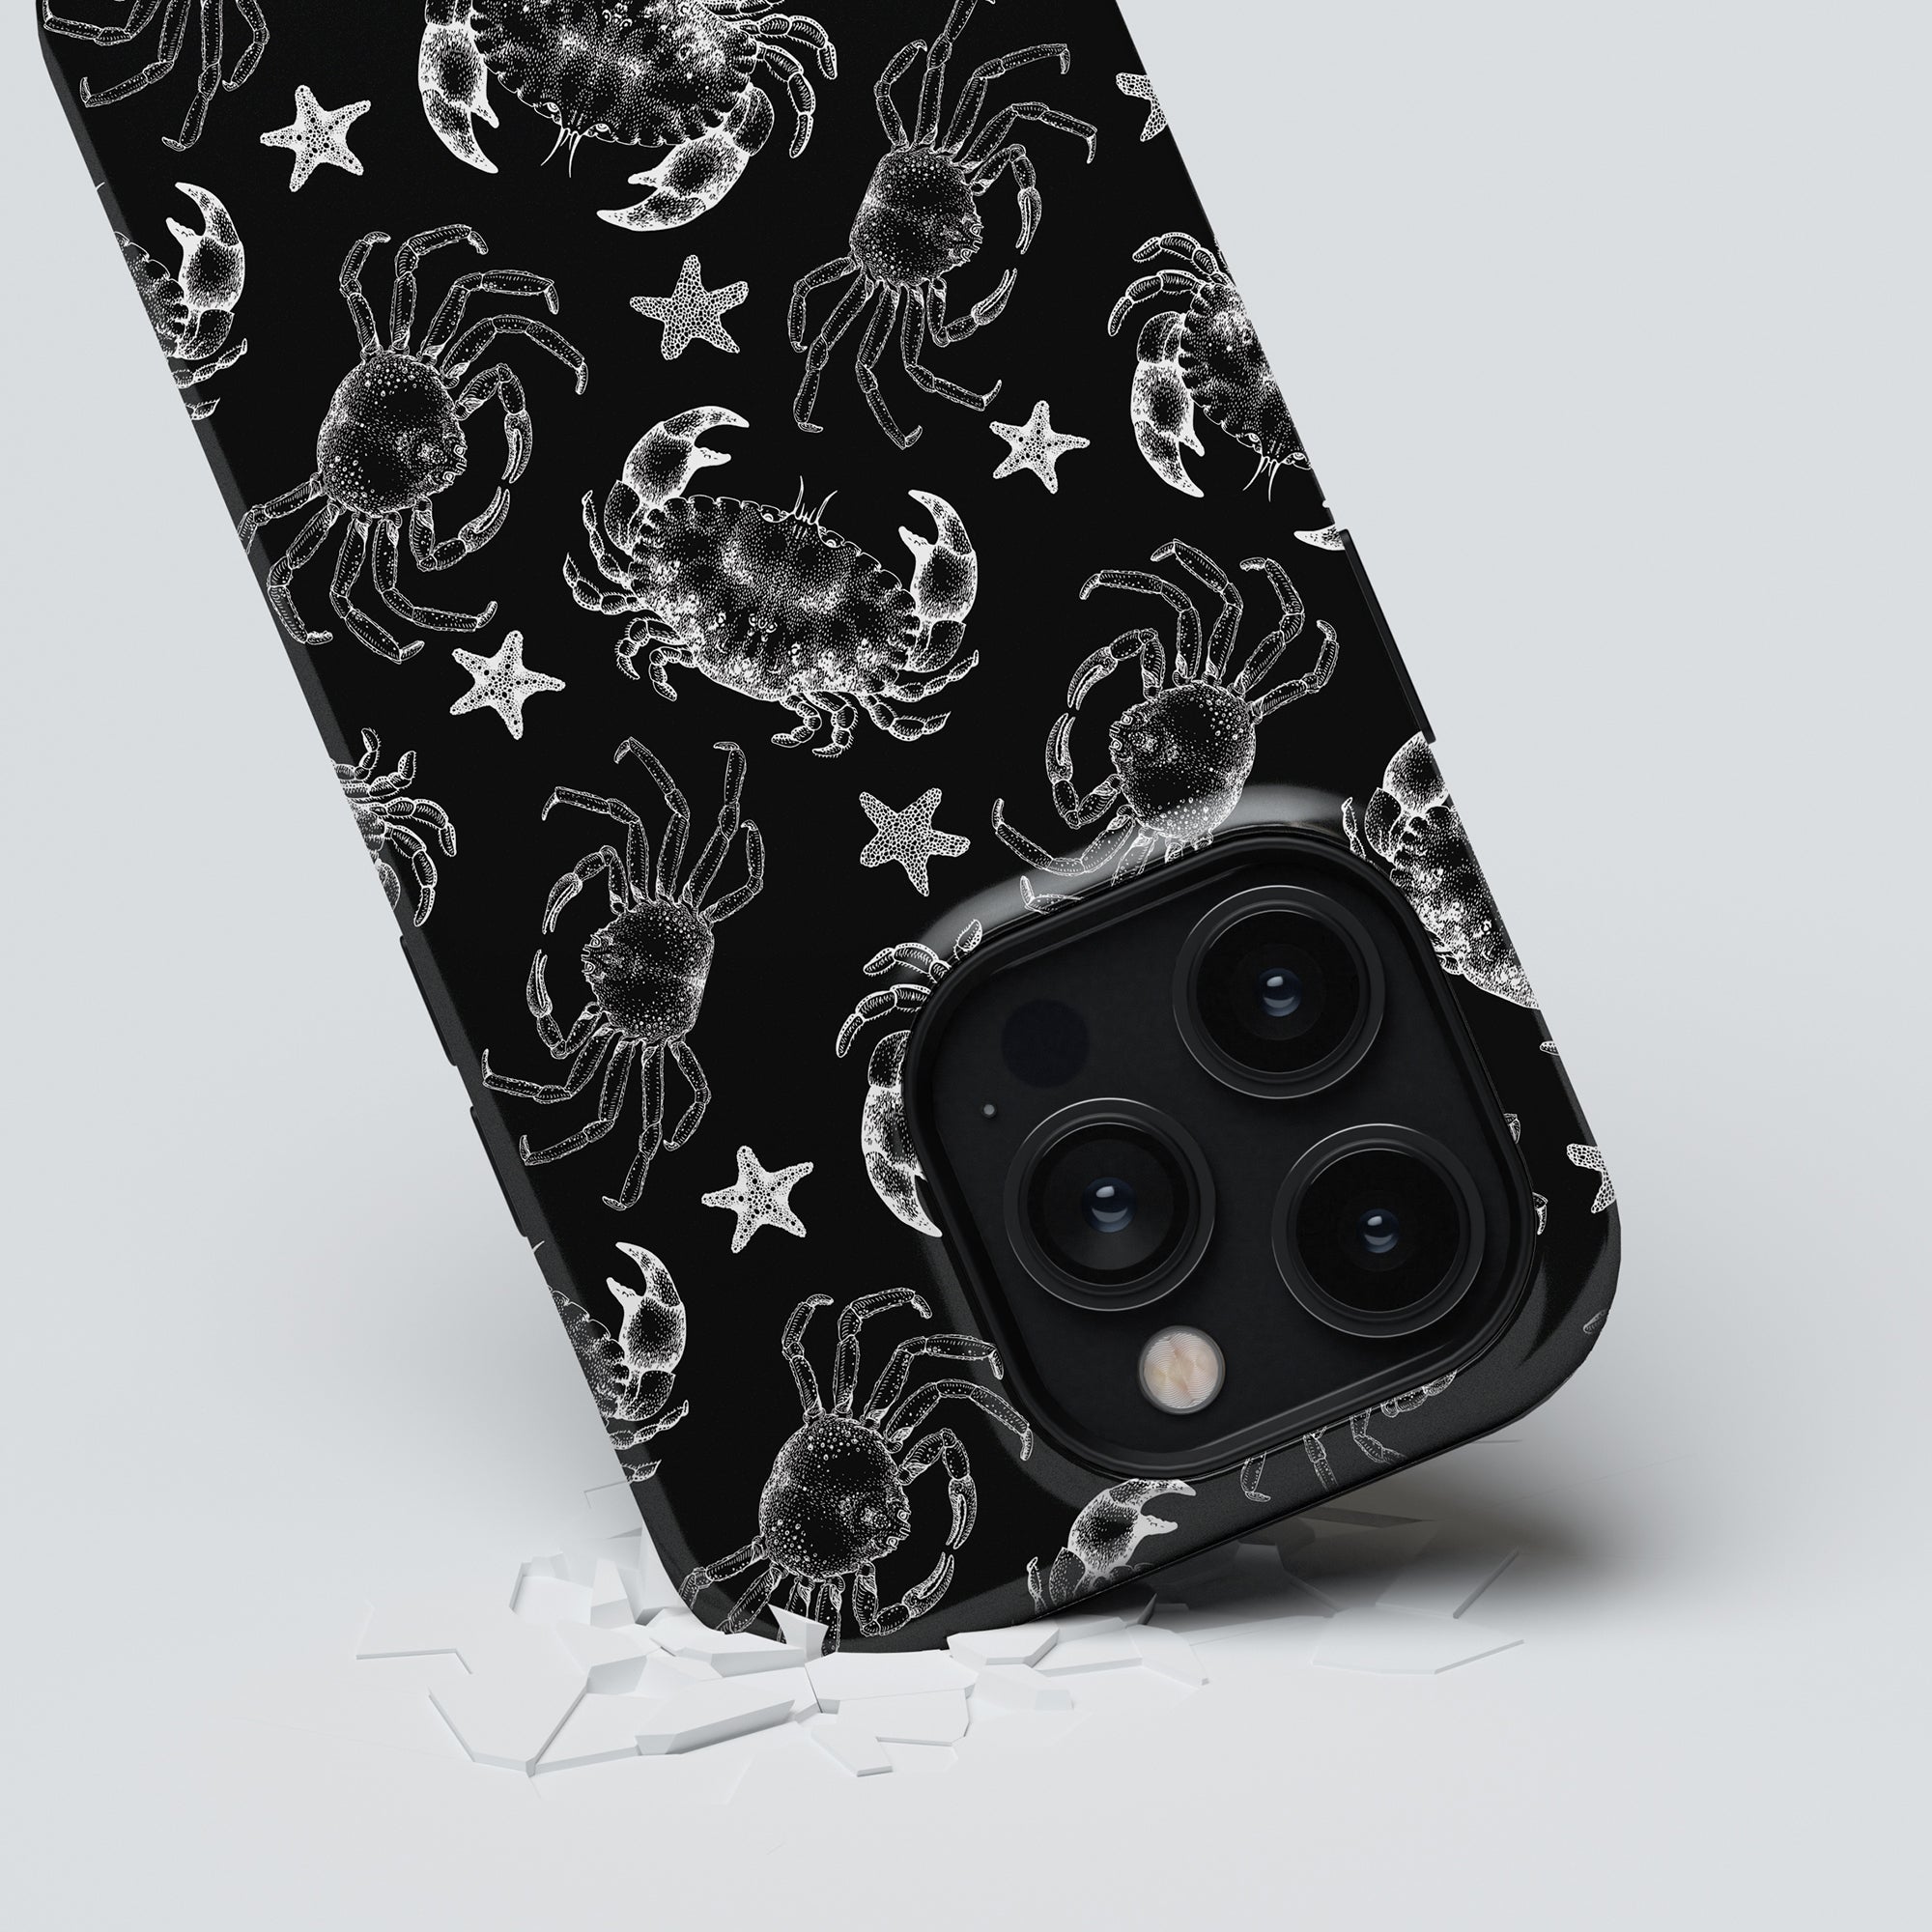 A smartphone from the Ocean Collection with a robust Black Crab - Tough Case featuring a white crab and starfish pattern is lying on a white surface. The Black Crab - Tough Case prominently displays the phone's camera lenses.